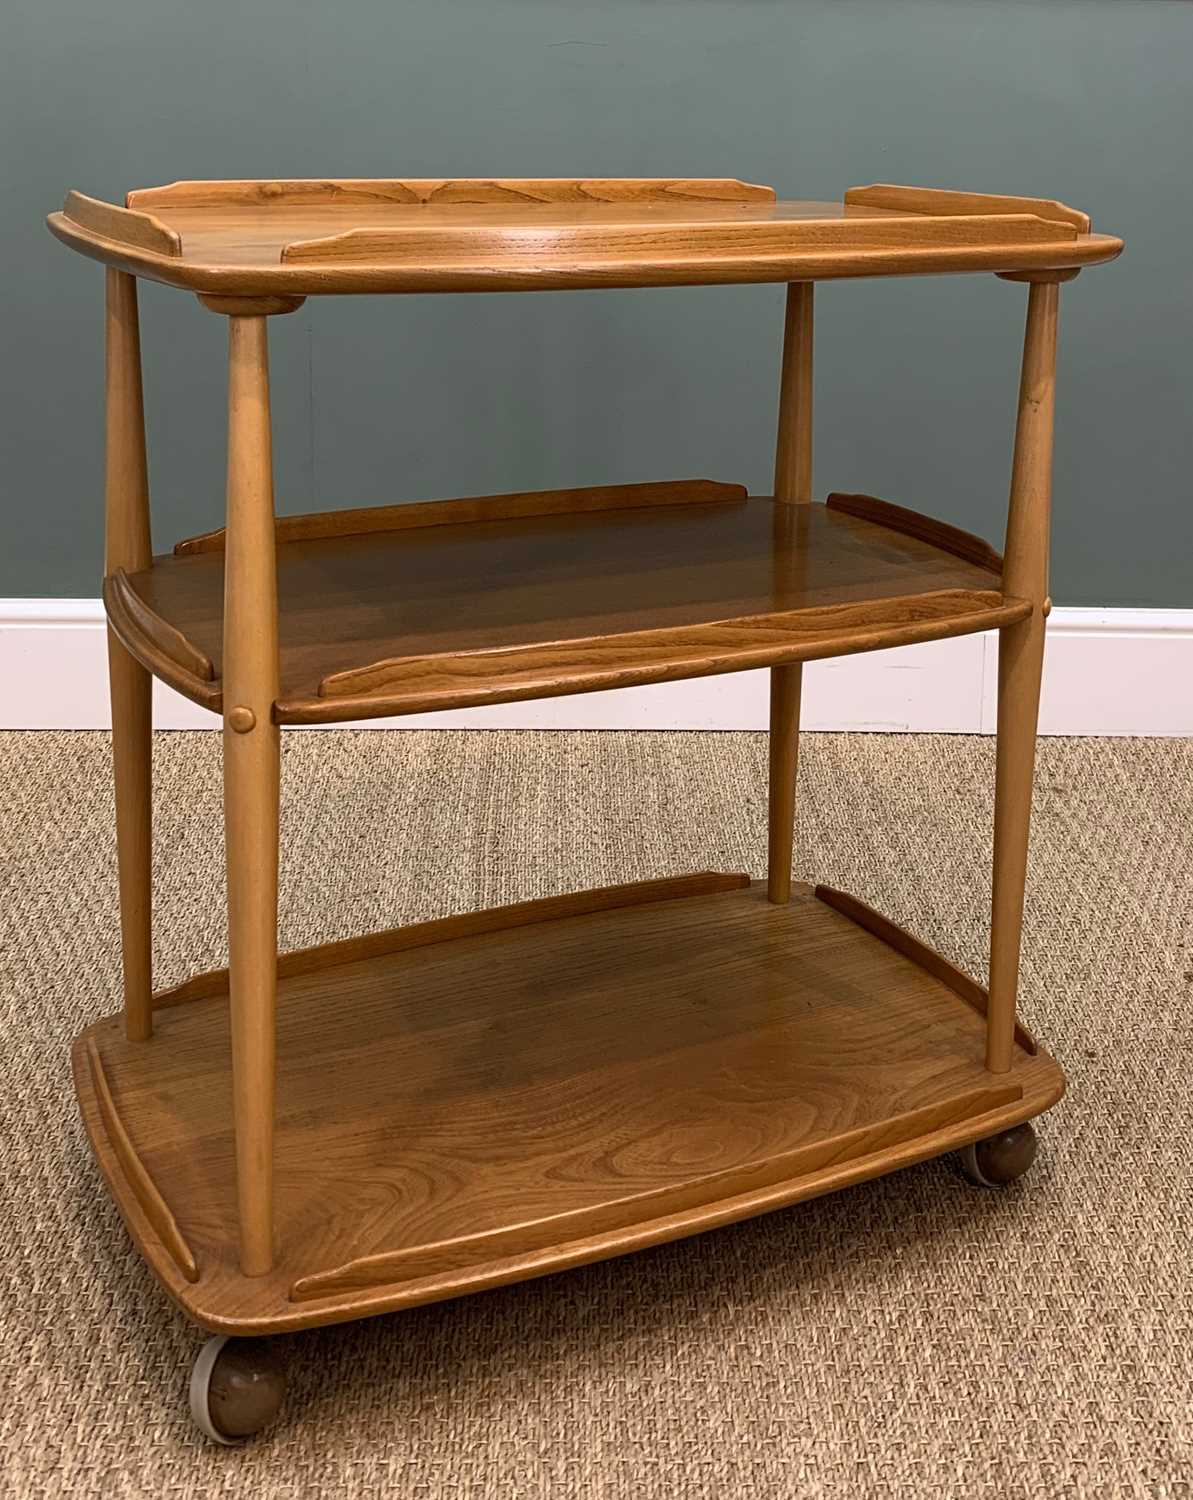 MID-CENTURY ERCOL 458 WINDSOR THREE TIER TROLLEY, gold label, solid elm and beech, natural colour, - Image 3 of 3